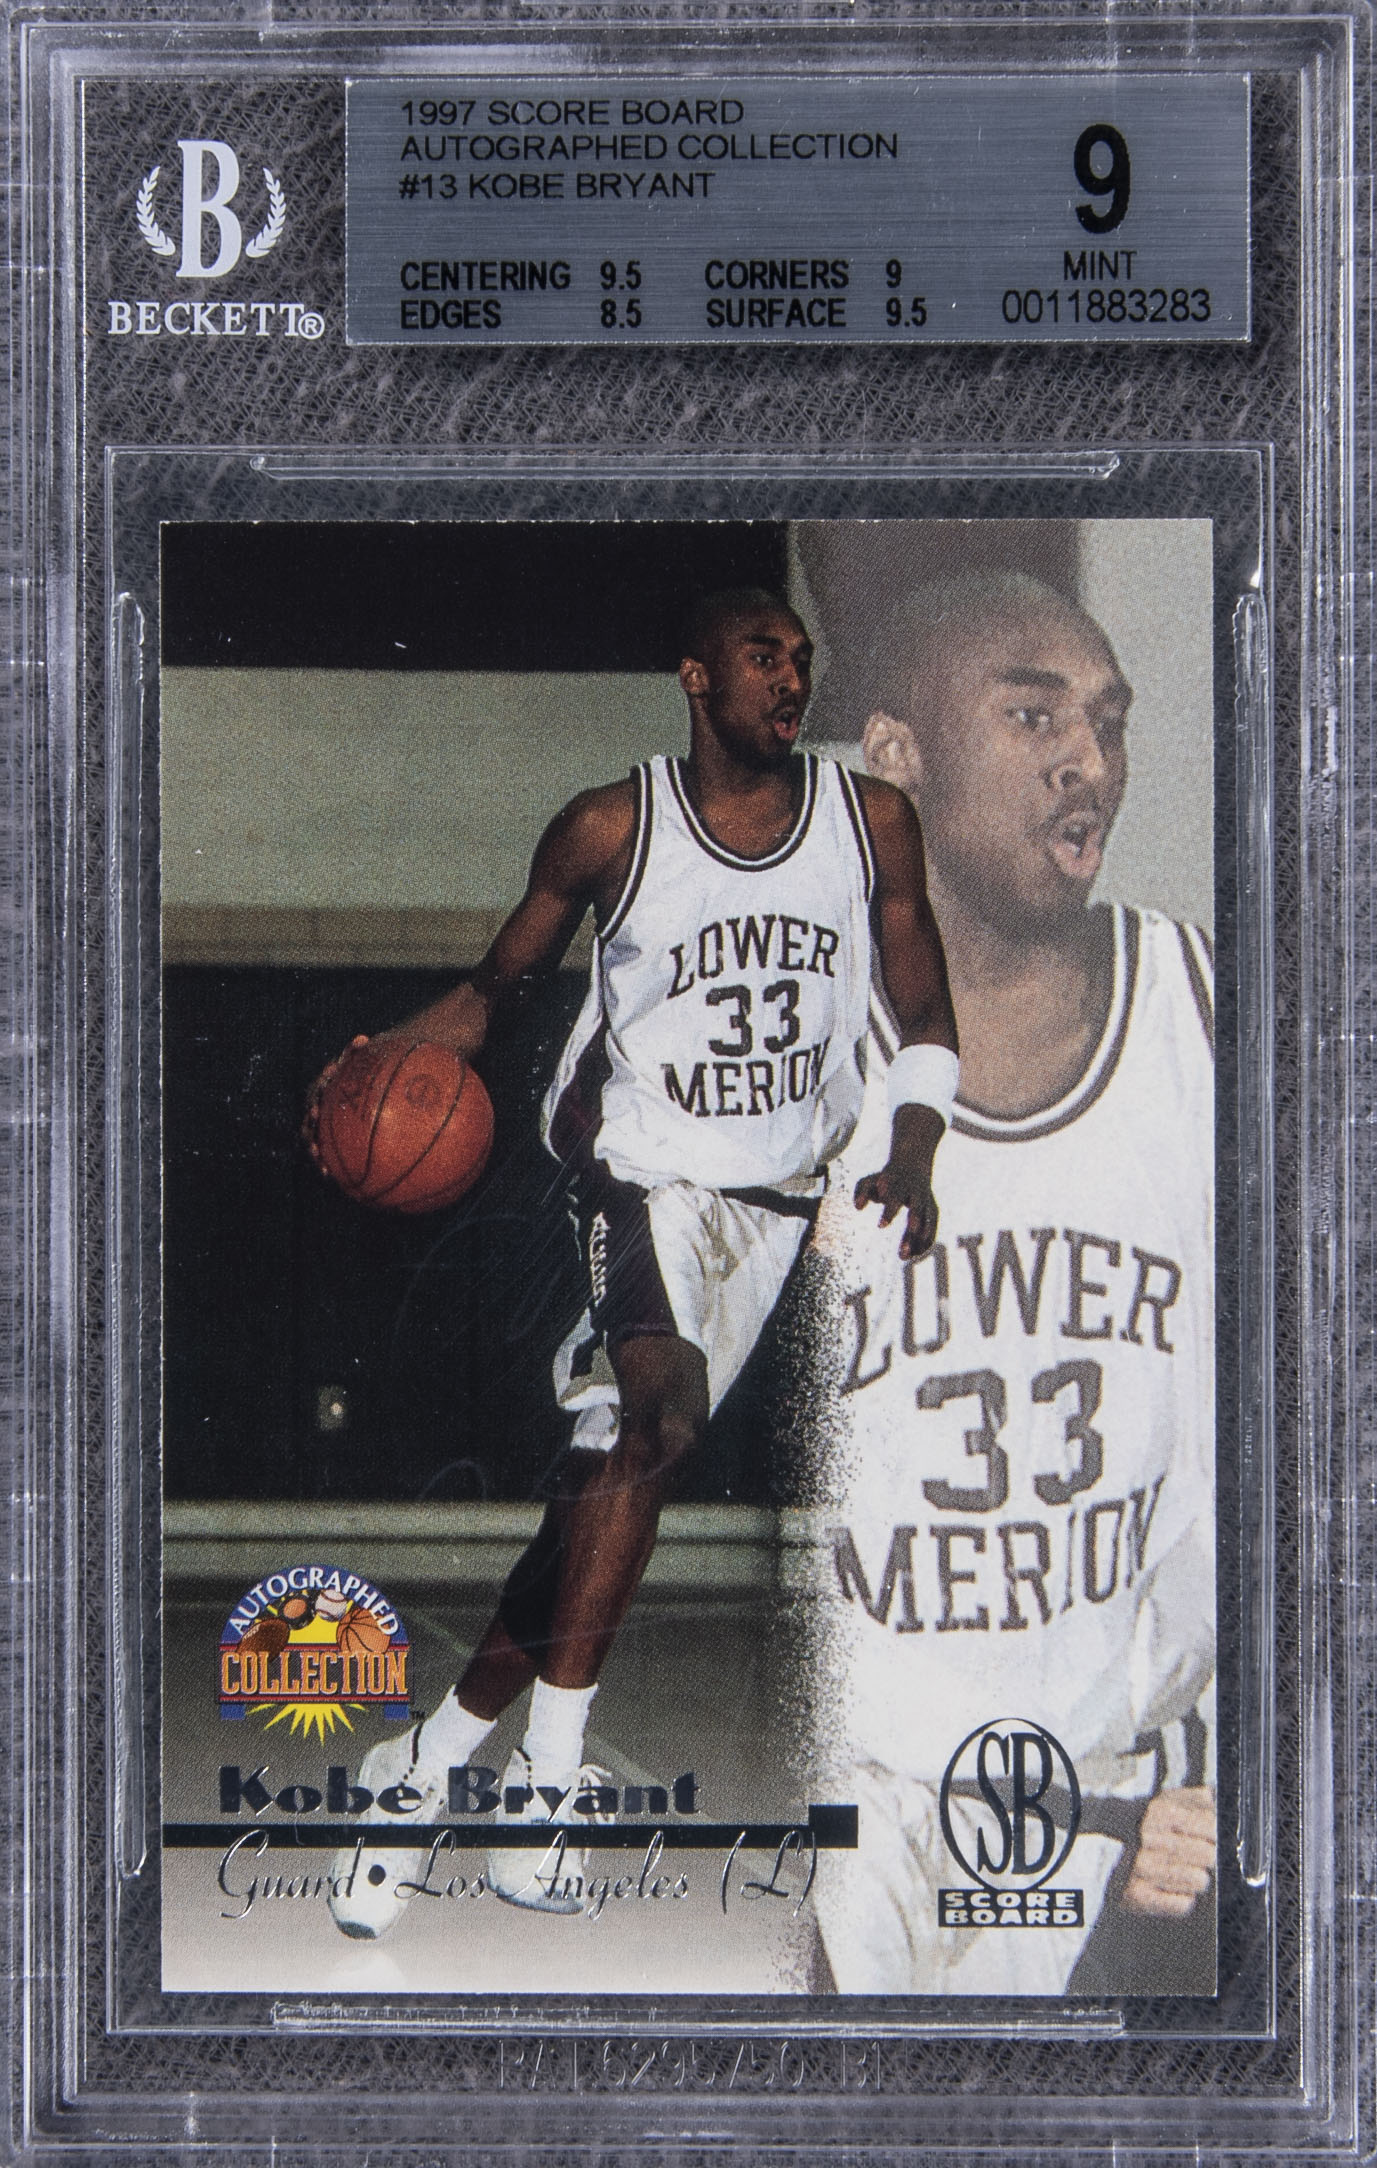 Lot Detail - 1997 Score Board Autograph Collection #13 Kobe Bryant Rookie Card - BGS MINT 9